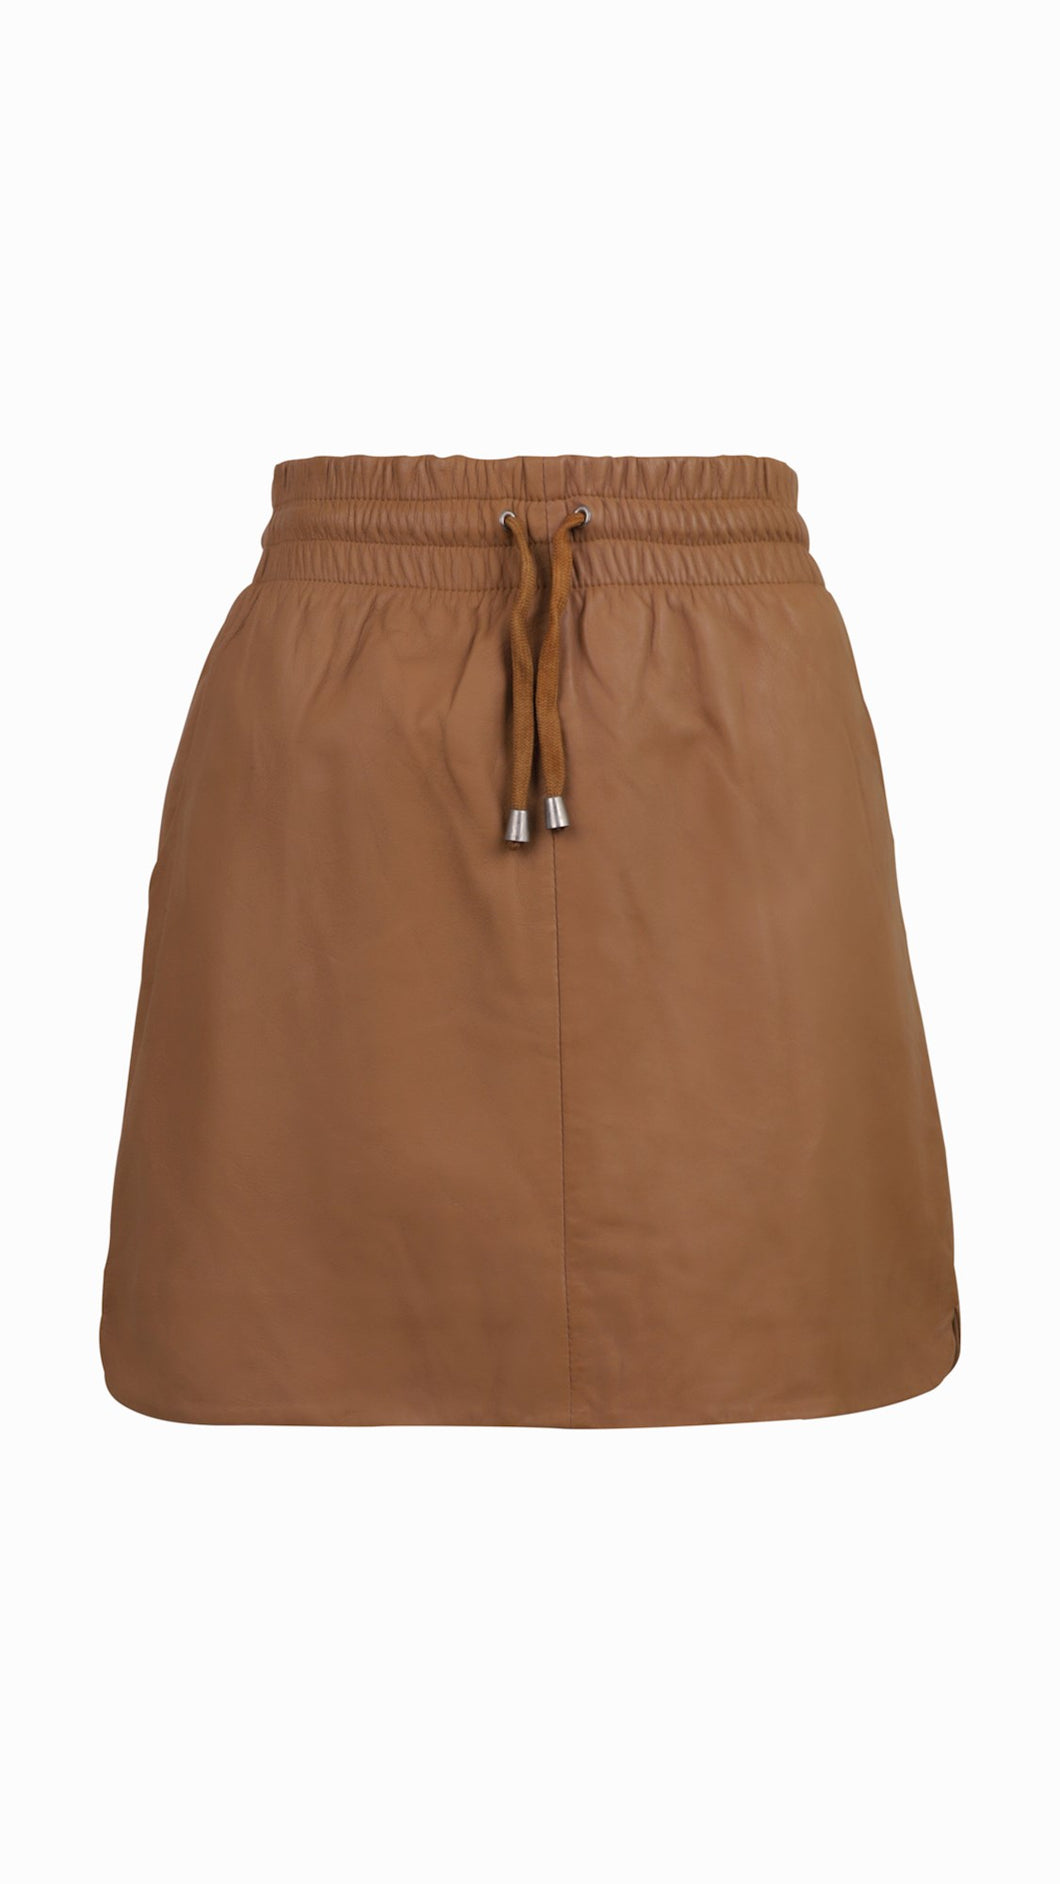 GRACE LEATHER SKIRT CAMEL - MARCH23